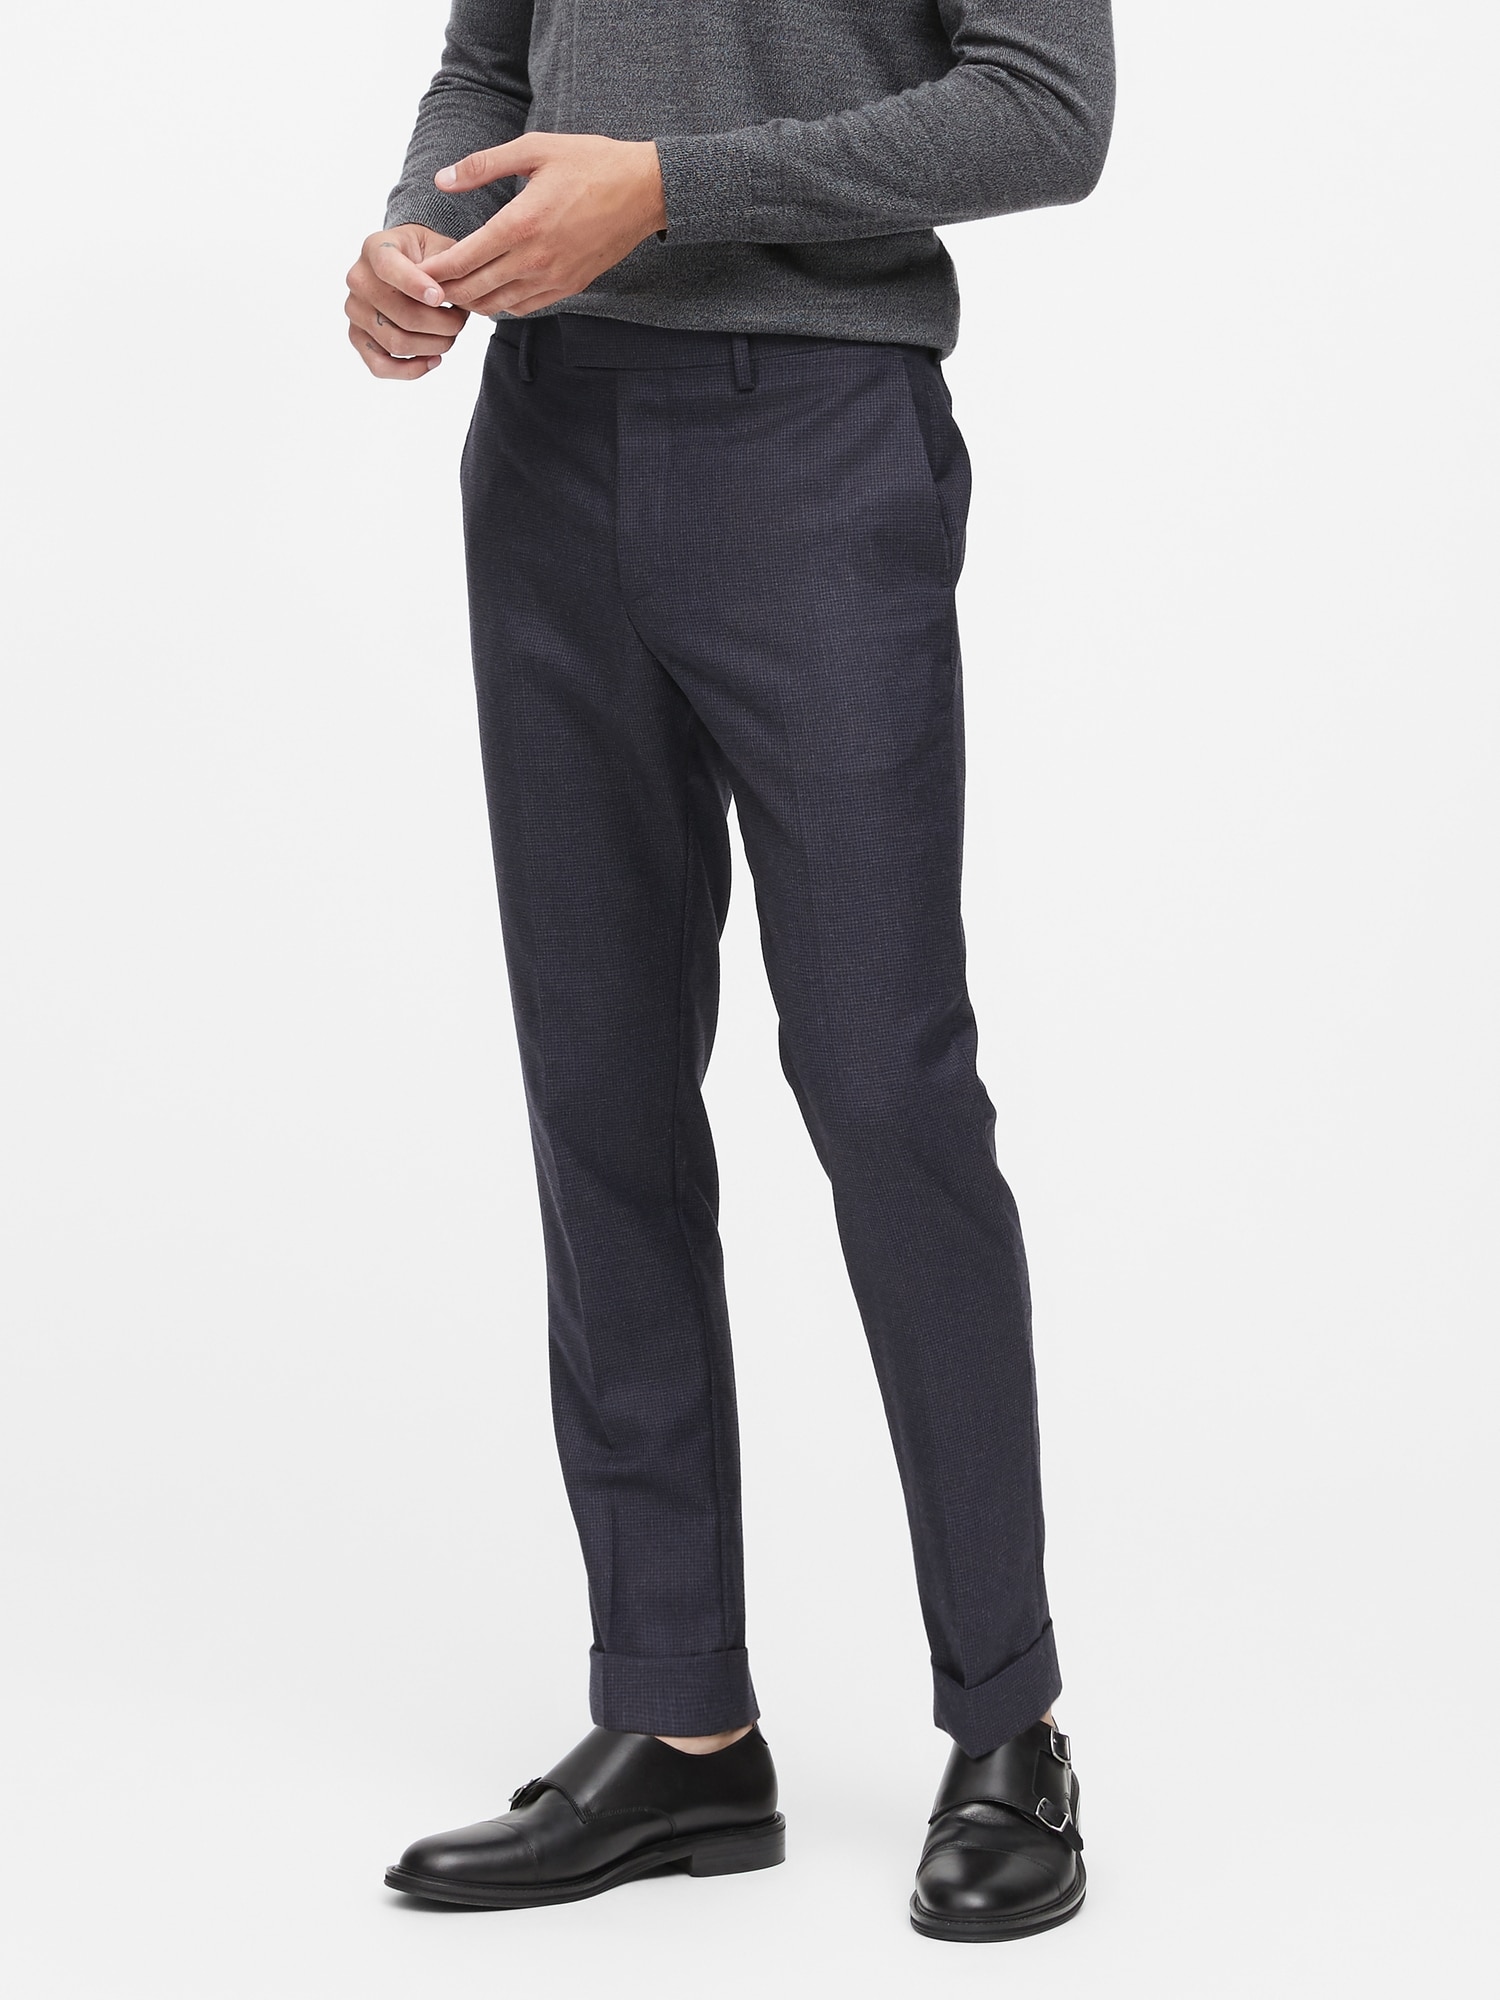 Slim Tapered Houndstooth Wool Suit Trouser